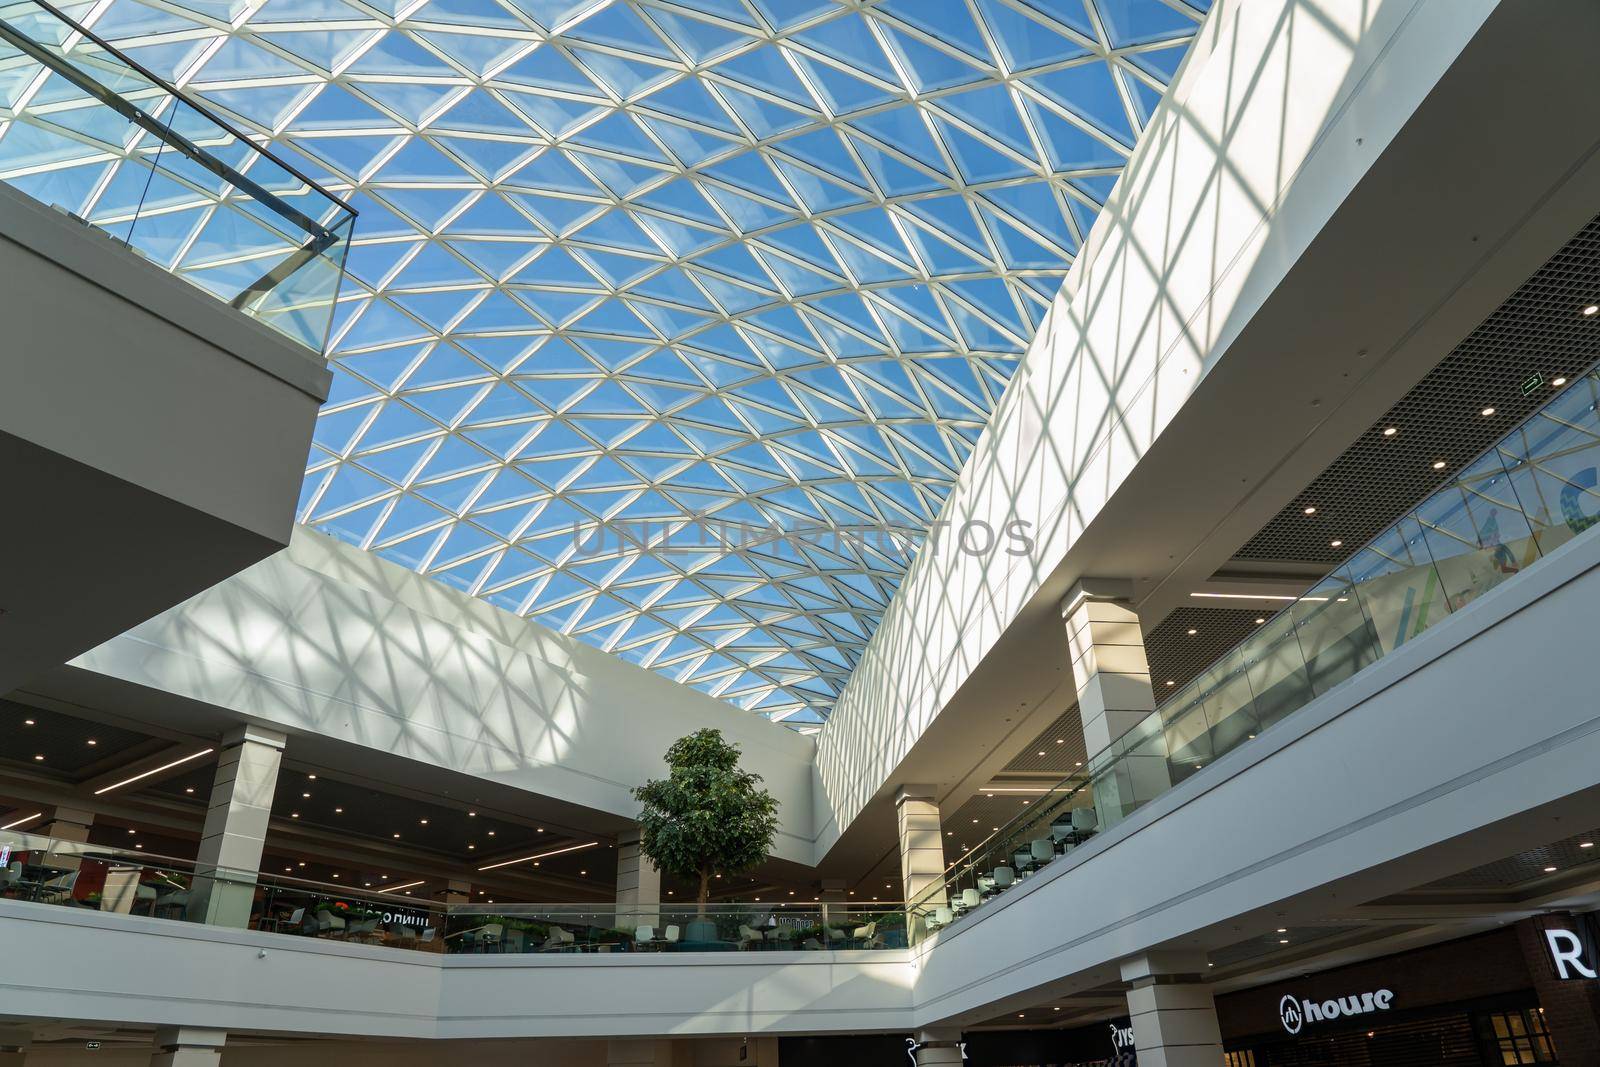 The interior of the modern large shopping and entertainment complex Trinity with a transparent glass roof. by BY-_-BY